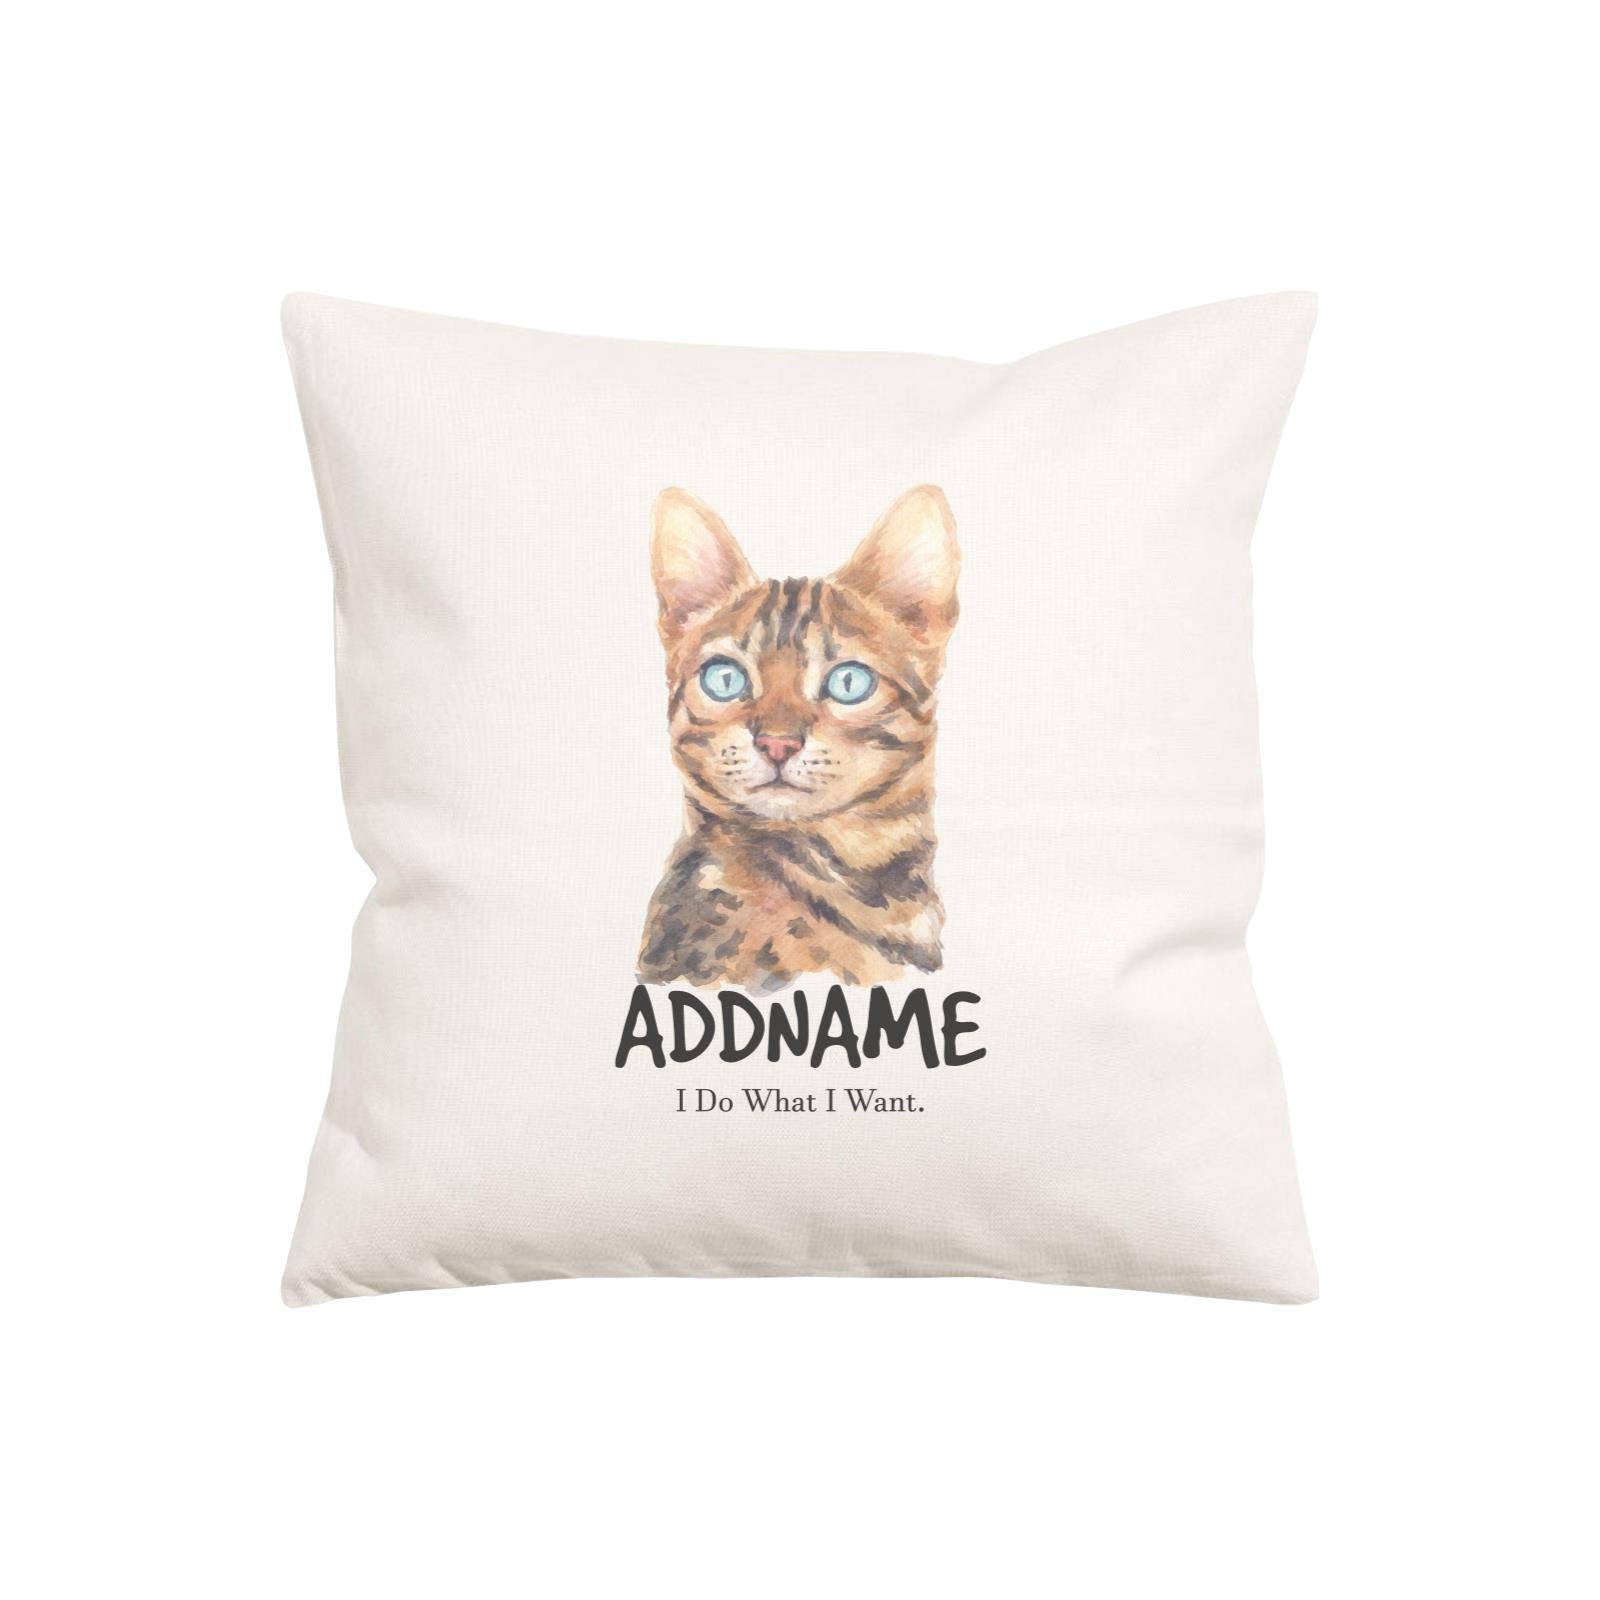 Watercolor Cat Series Bengel Cat I Do What I Want Addname Pillow Cushion